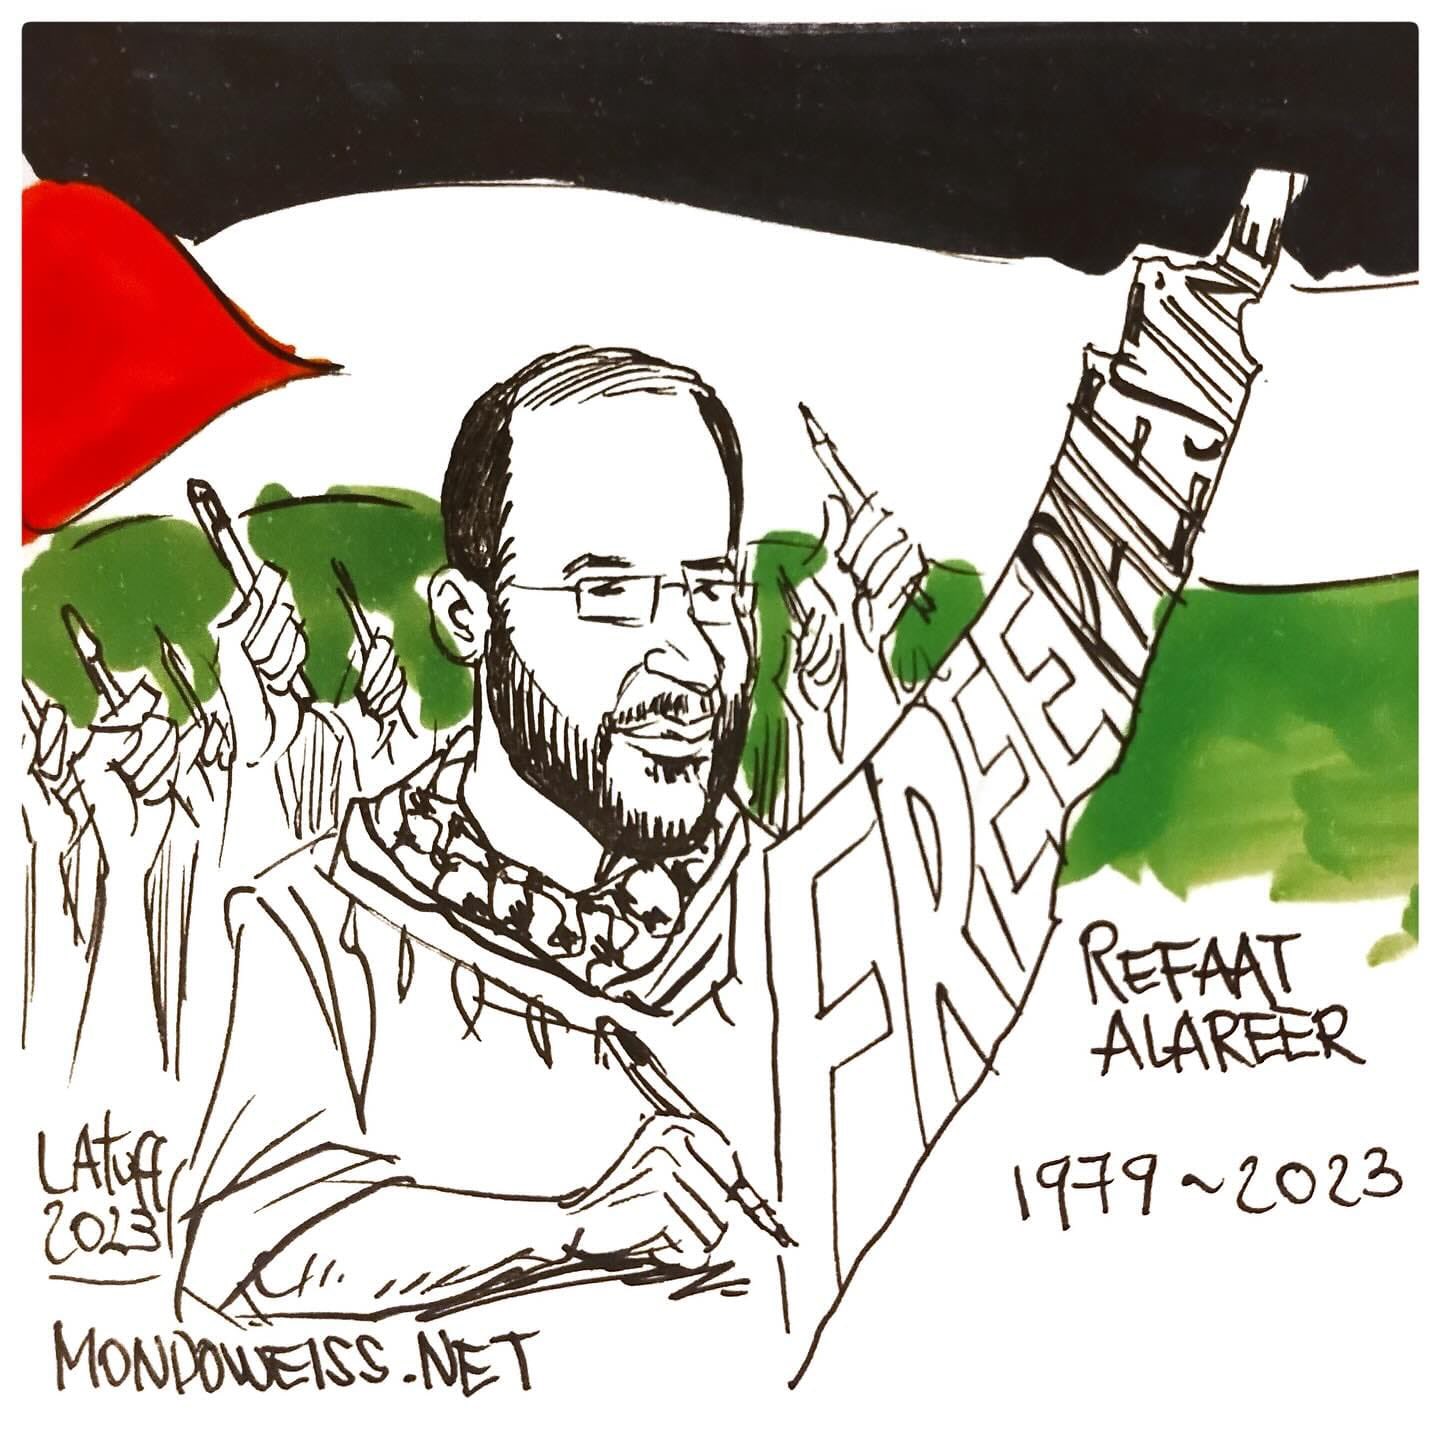 Dr. Refaat Alareer: The voice of Gaza that will never die